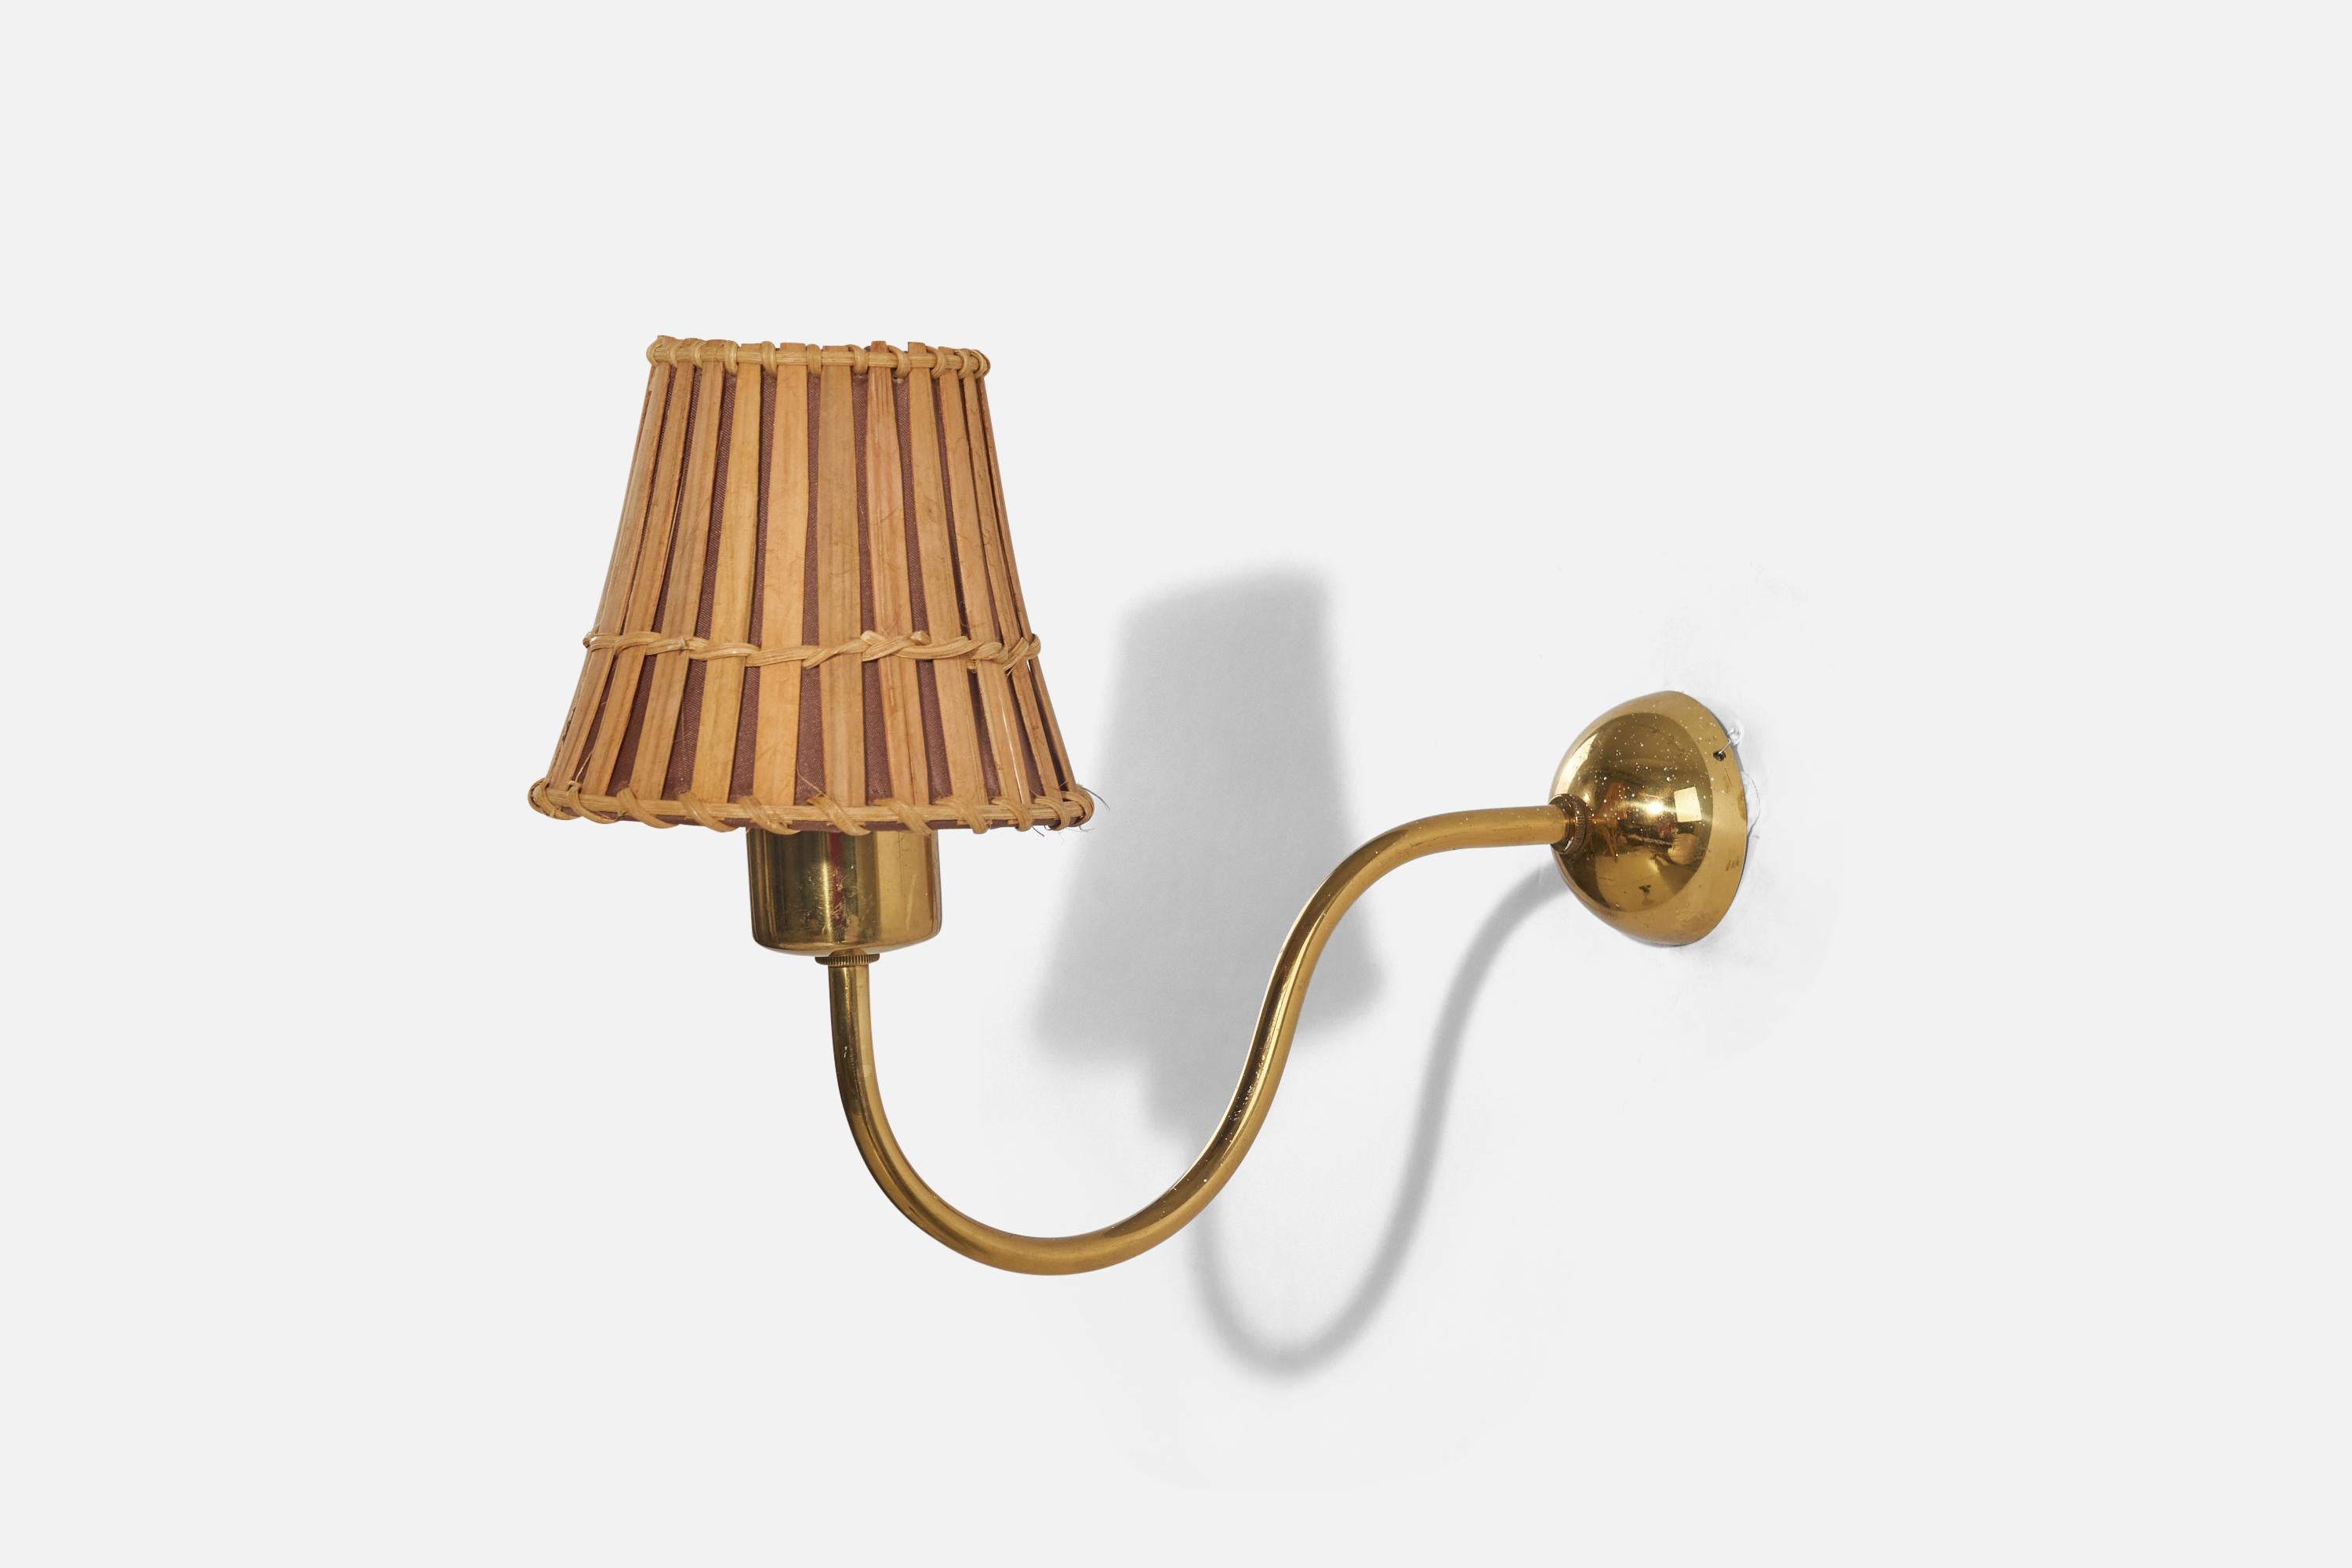 A pair of brass, bamboo and fabric wall light designed and produced by Josef Frank, Sweden, 1950s. 

Dimensions of back plate (inches) : (2.43 x 2.43 x 1.25).